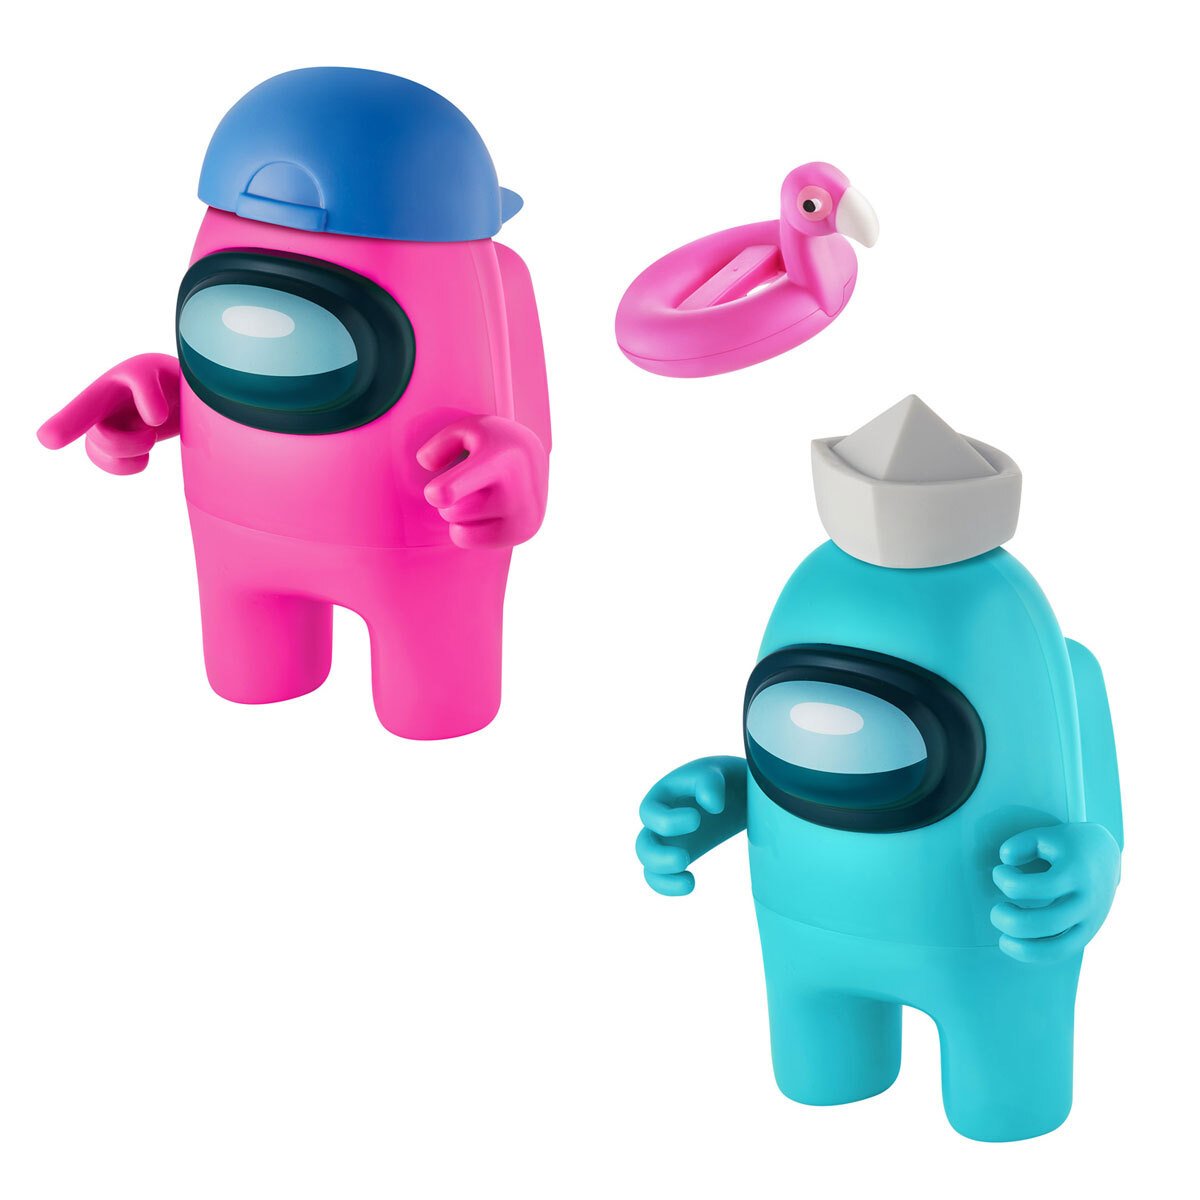 Among Us Series 2 11.5cm Figures 2 Pack - Pink & Blue Crewmates